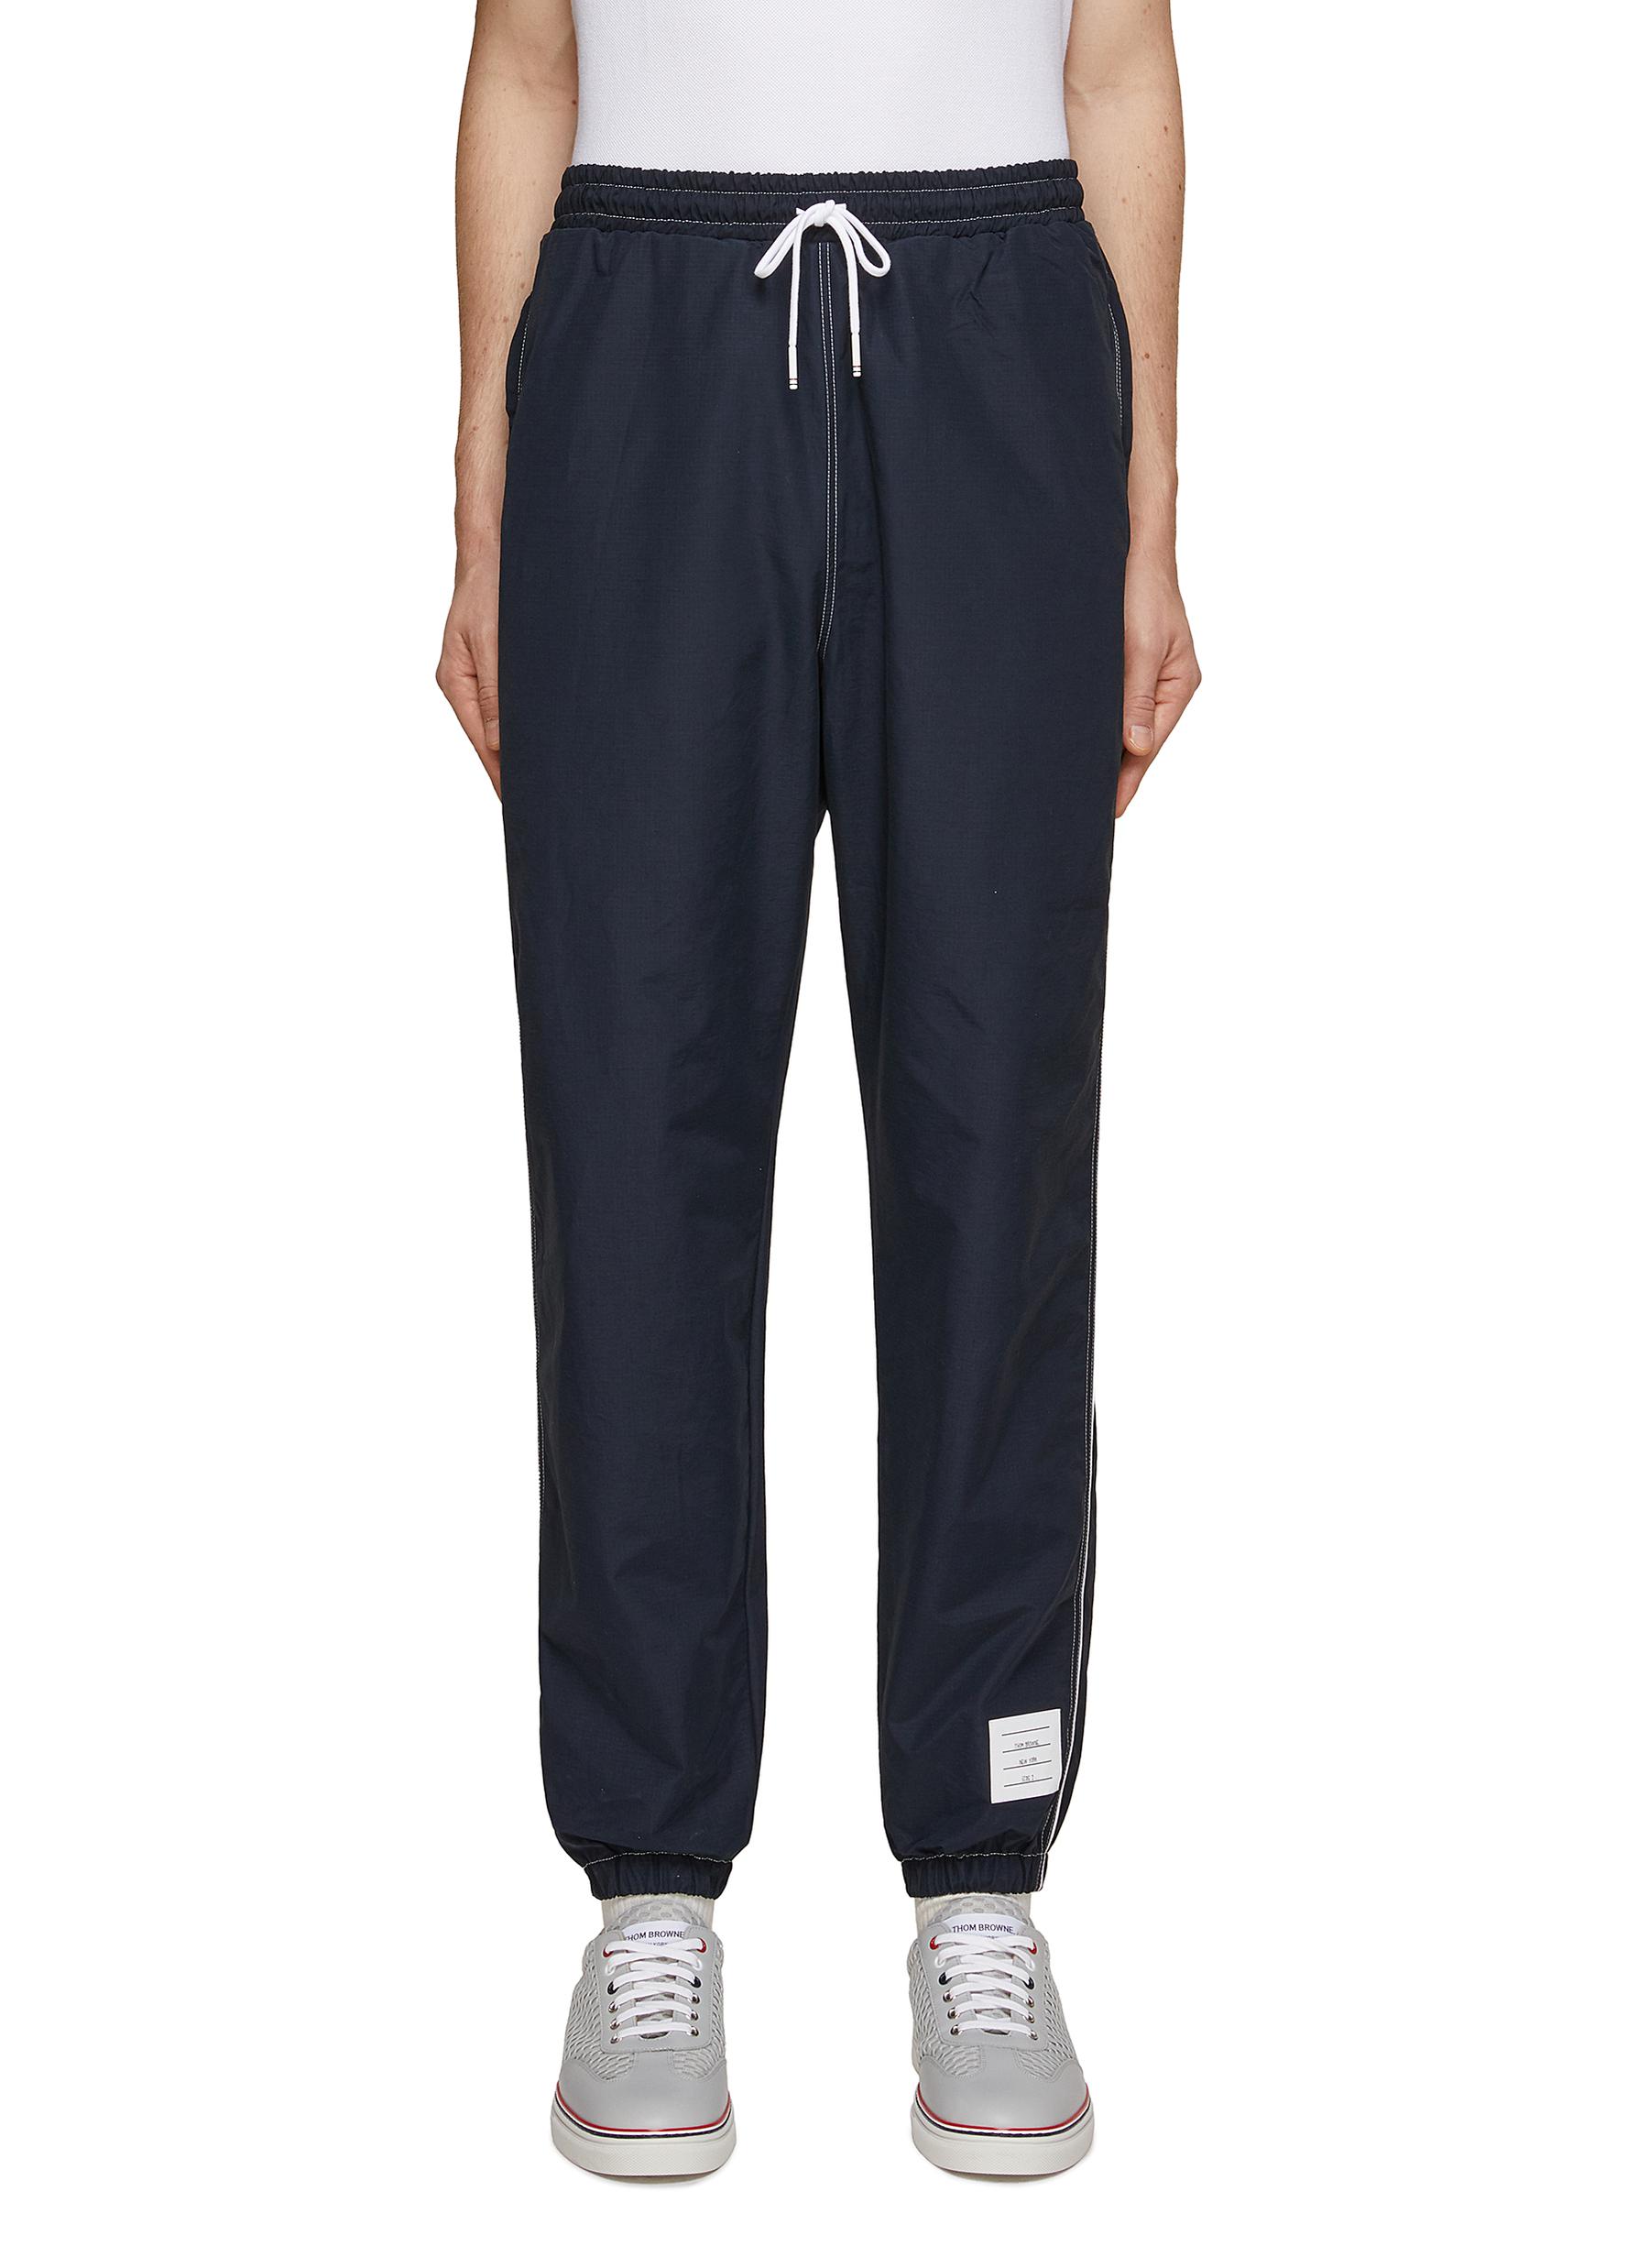 THOM BROWNE CONTRAST WHITE STITCHING RIPSTOP TRACK PANTS